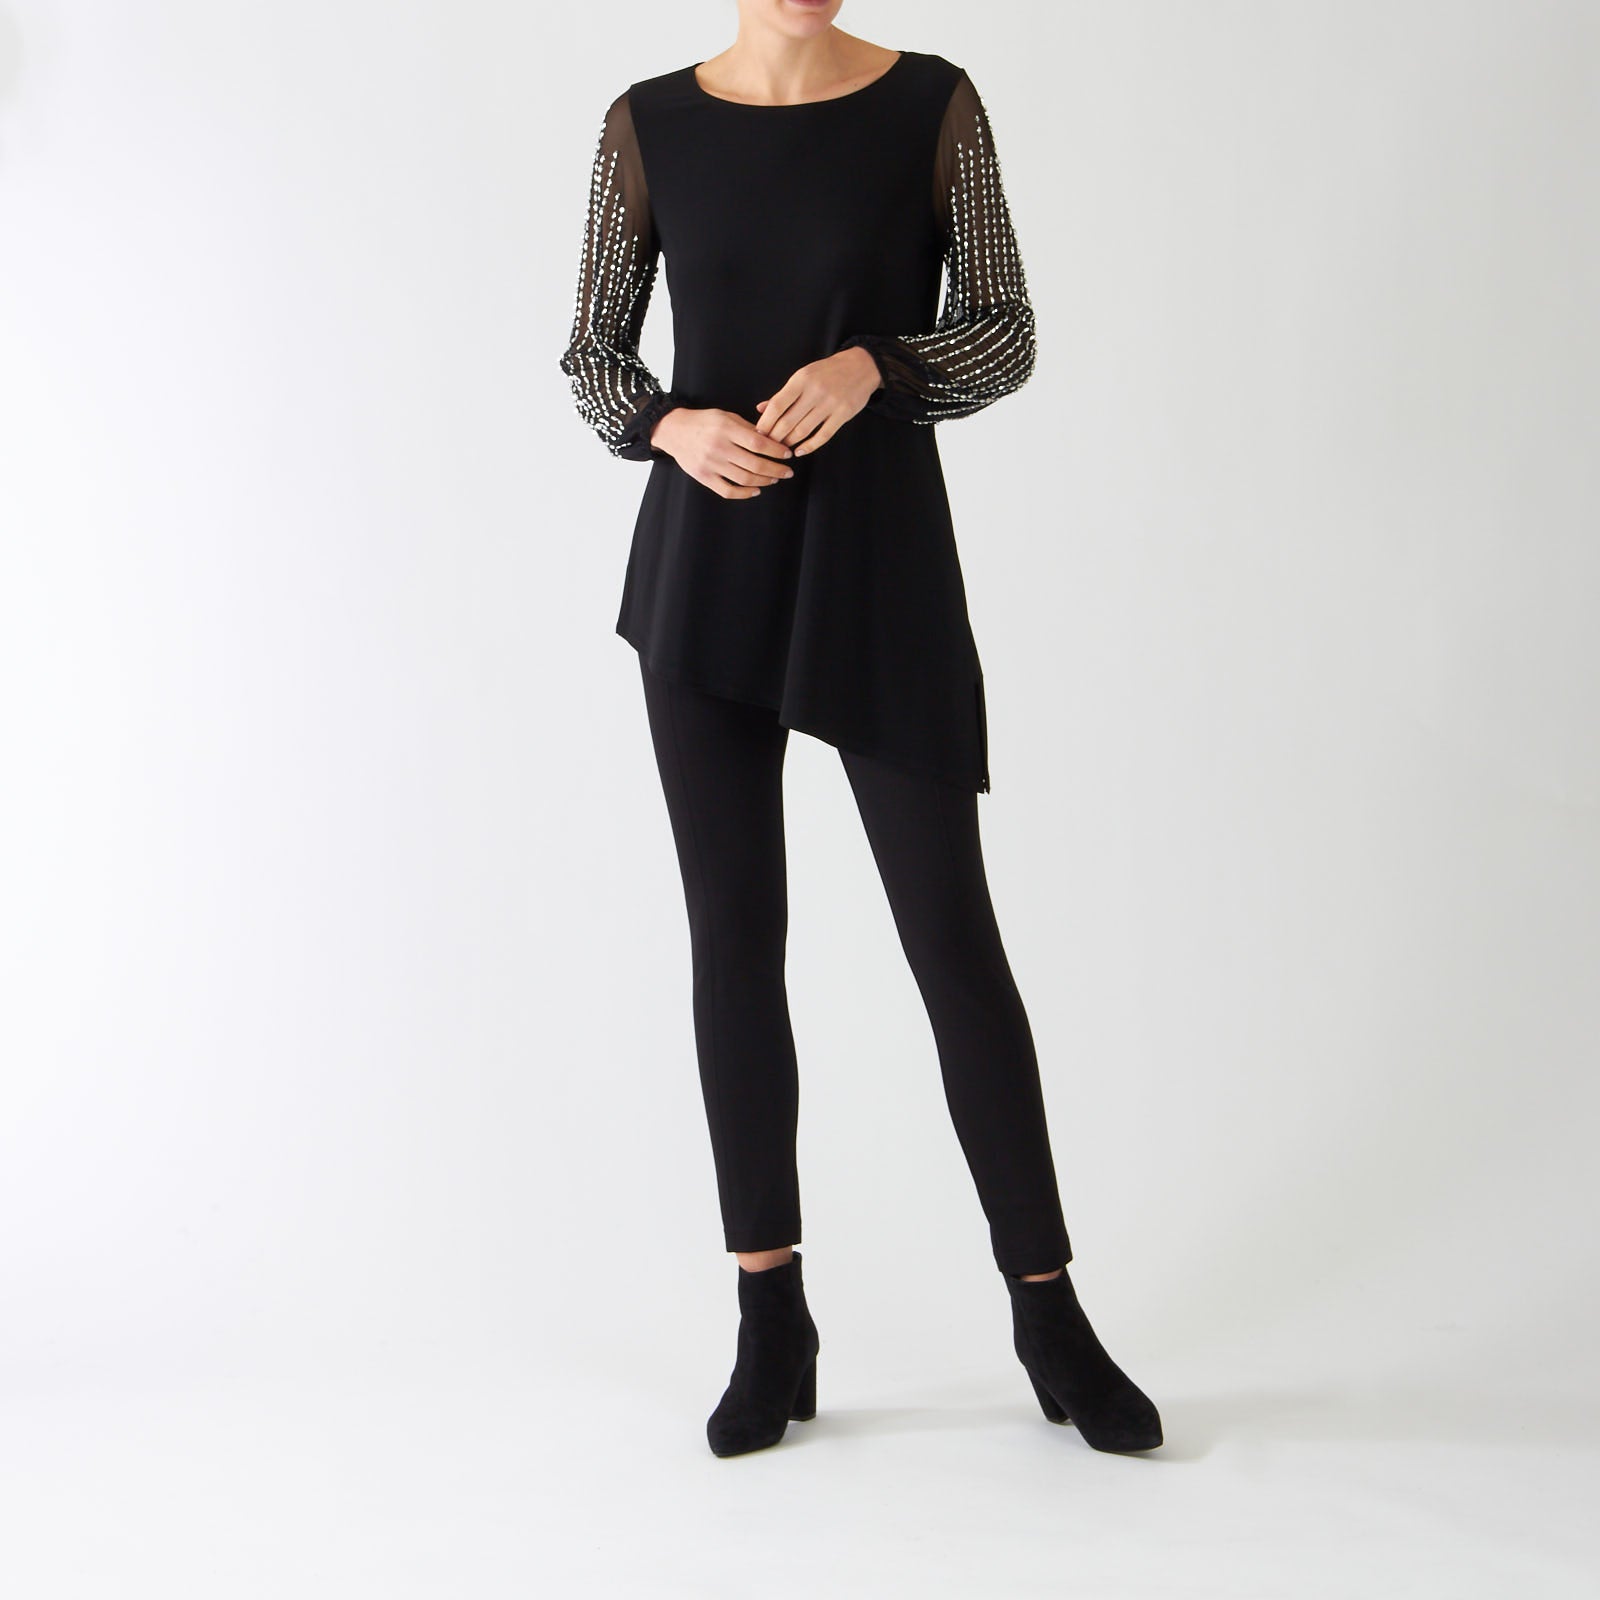 Black Tunic With Beaded Sheer Sleeves